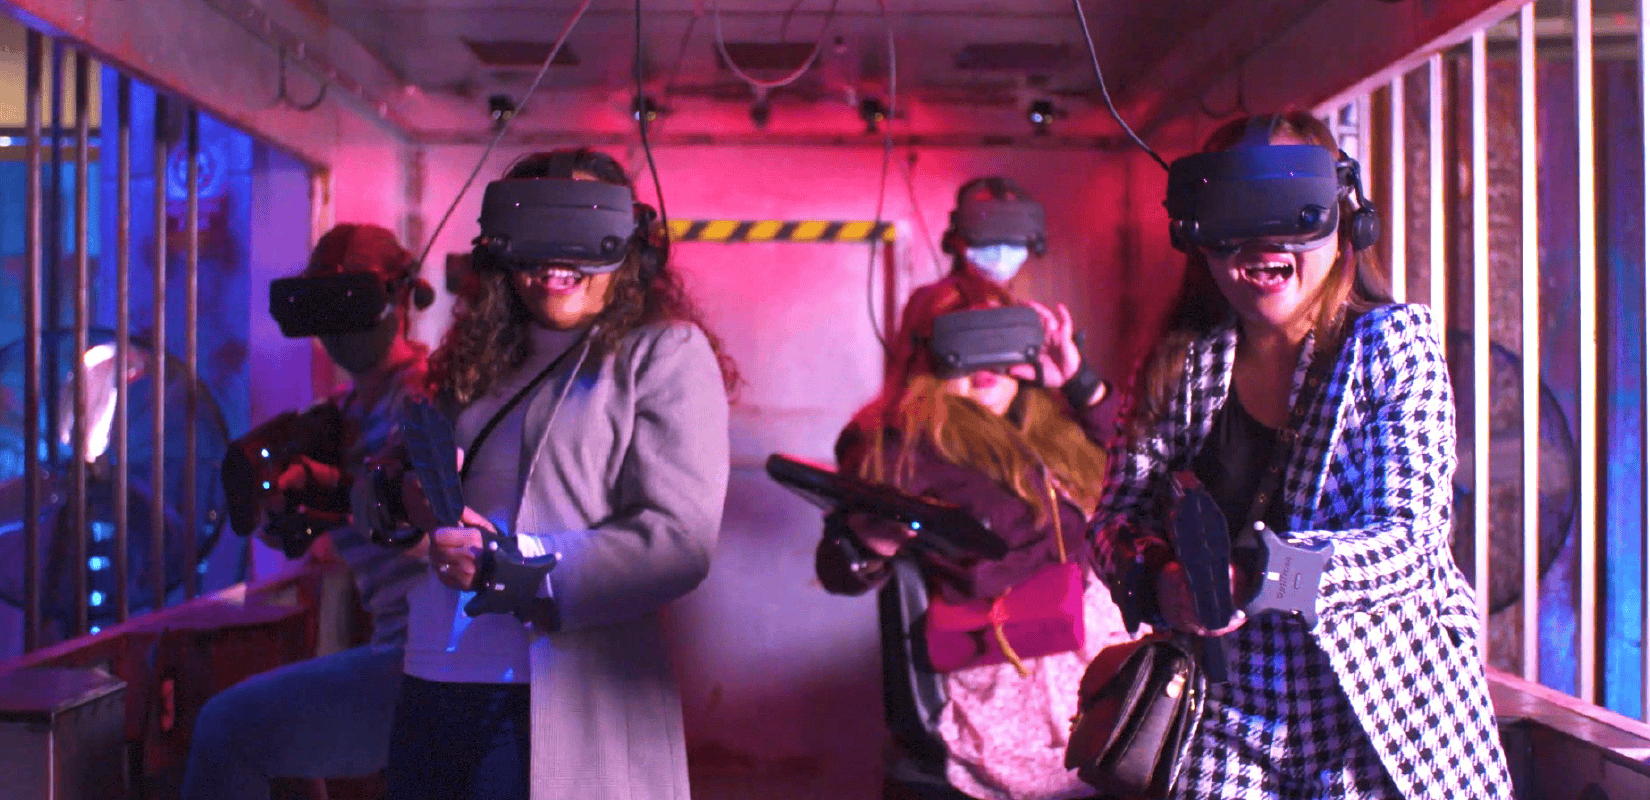 Attendees at Netflix event with VR headsets